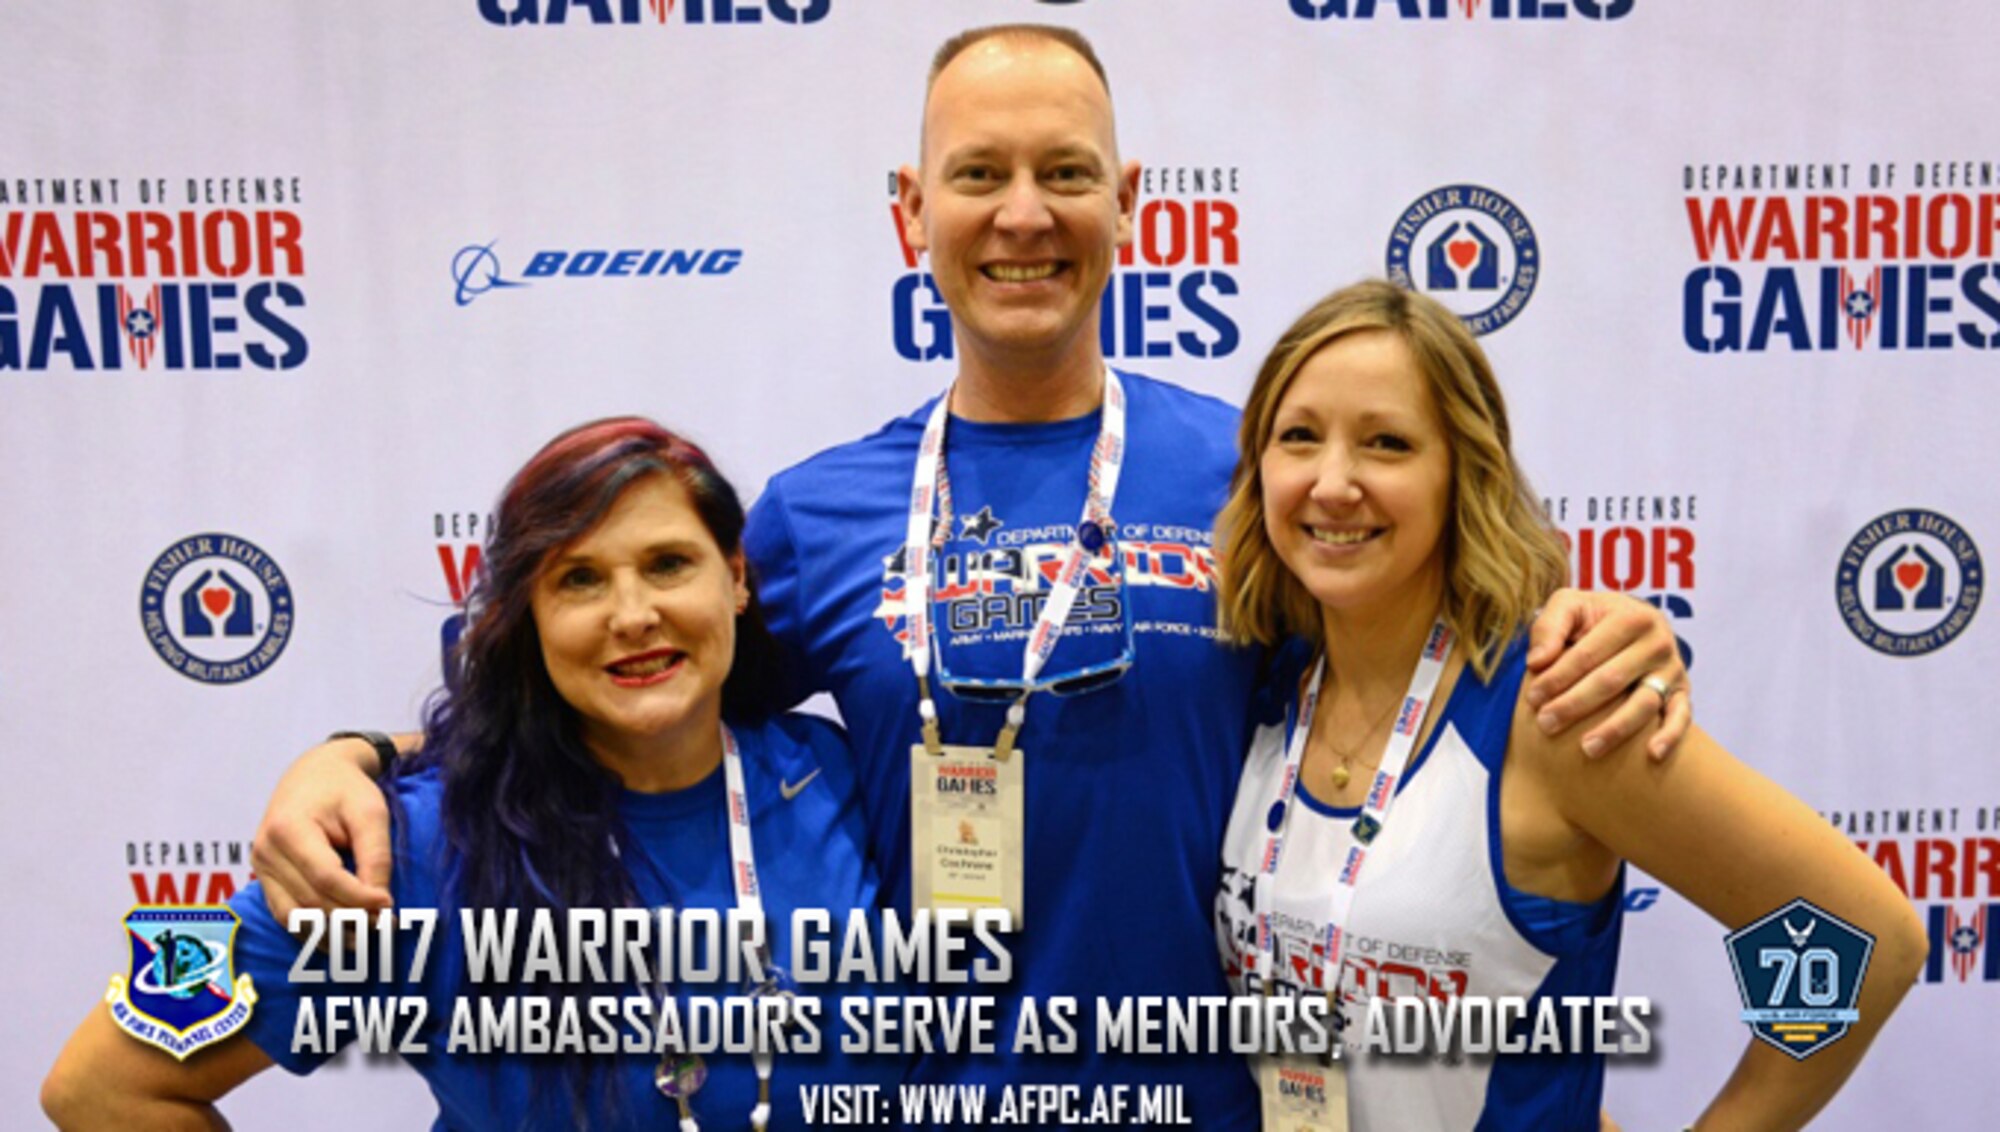 U.S. Air Force veteran Lee Kuxhaus, a former Air Force diagnostic radiologist officer, U.S. Air Force veteran Chris Cochrane, a former intelligence officer, and his wife Ashley Cochrane pose together at the 2017 Department of Defense Warrior Games July 3, 2017 at McCormick Place-Lakeside Center, Chicago, Ill. Lee and Chris are athlete ambassadors, while Ashley is a caregiver ambassador for this year’s games. (U.S. Air Force photo by Staff Sgt. Alexx Pons)